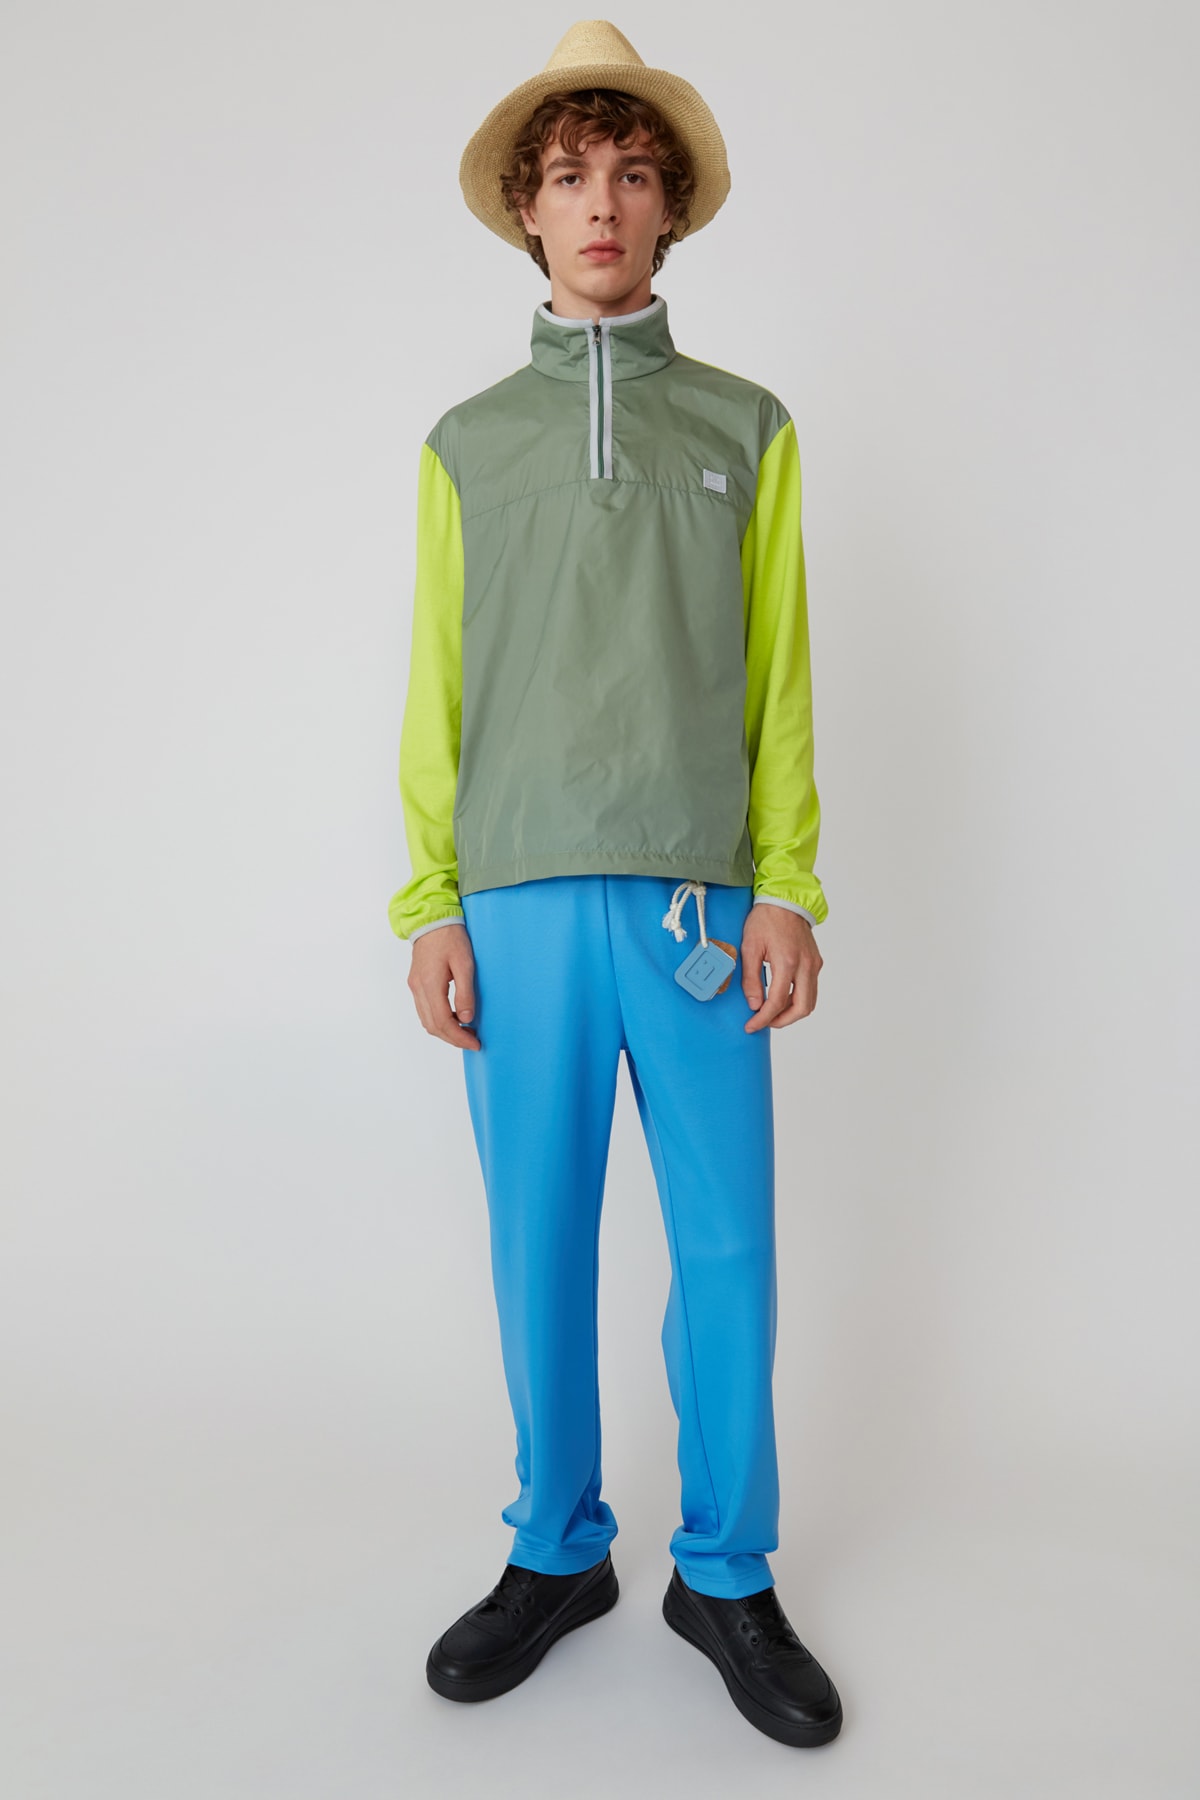 Acne Studios Spring/Summer 2019 Face Collection Sweater Green Pants Blue